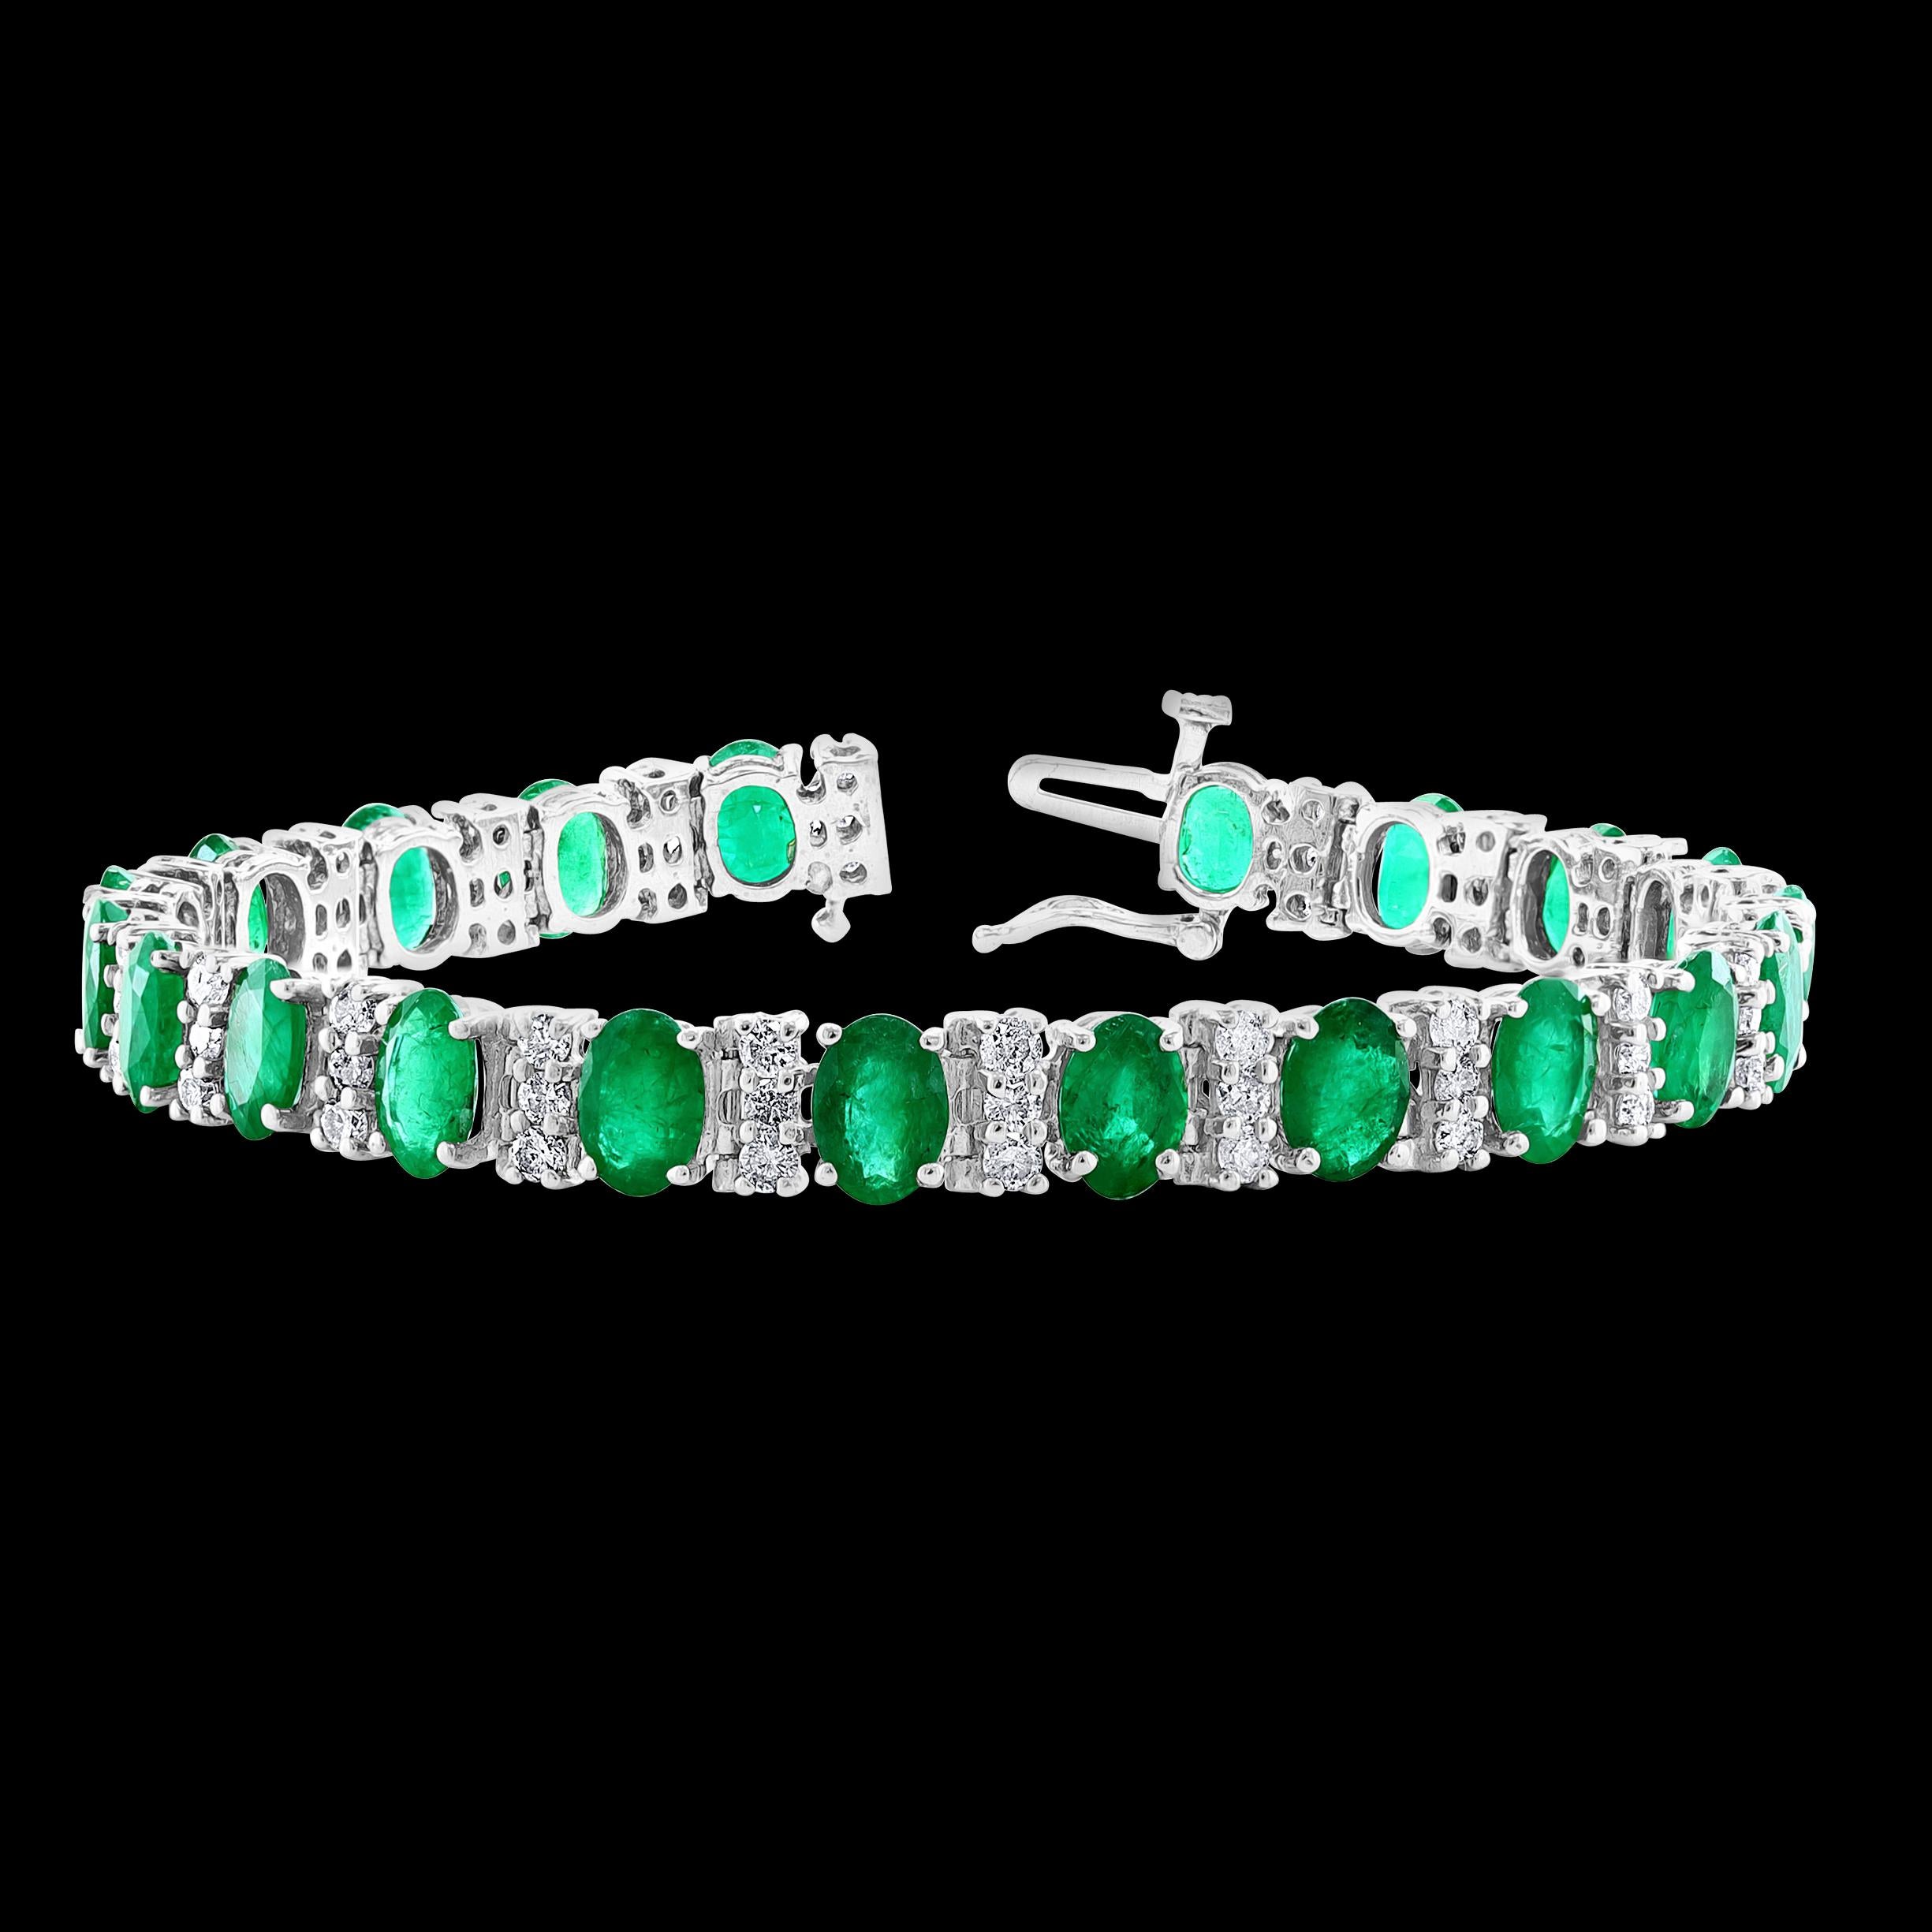 This exceptionally affordable Tennis bracelet has 21 stones of oval Emeralds . Each Emerald is spaced by three diamonds . Total weight of the Emeralds is approximately 18 Carat. Total number of diamonds are 66 and diamond weighs is over 1.8 ct.
The